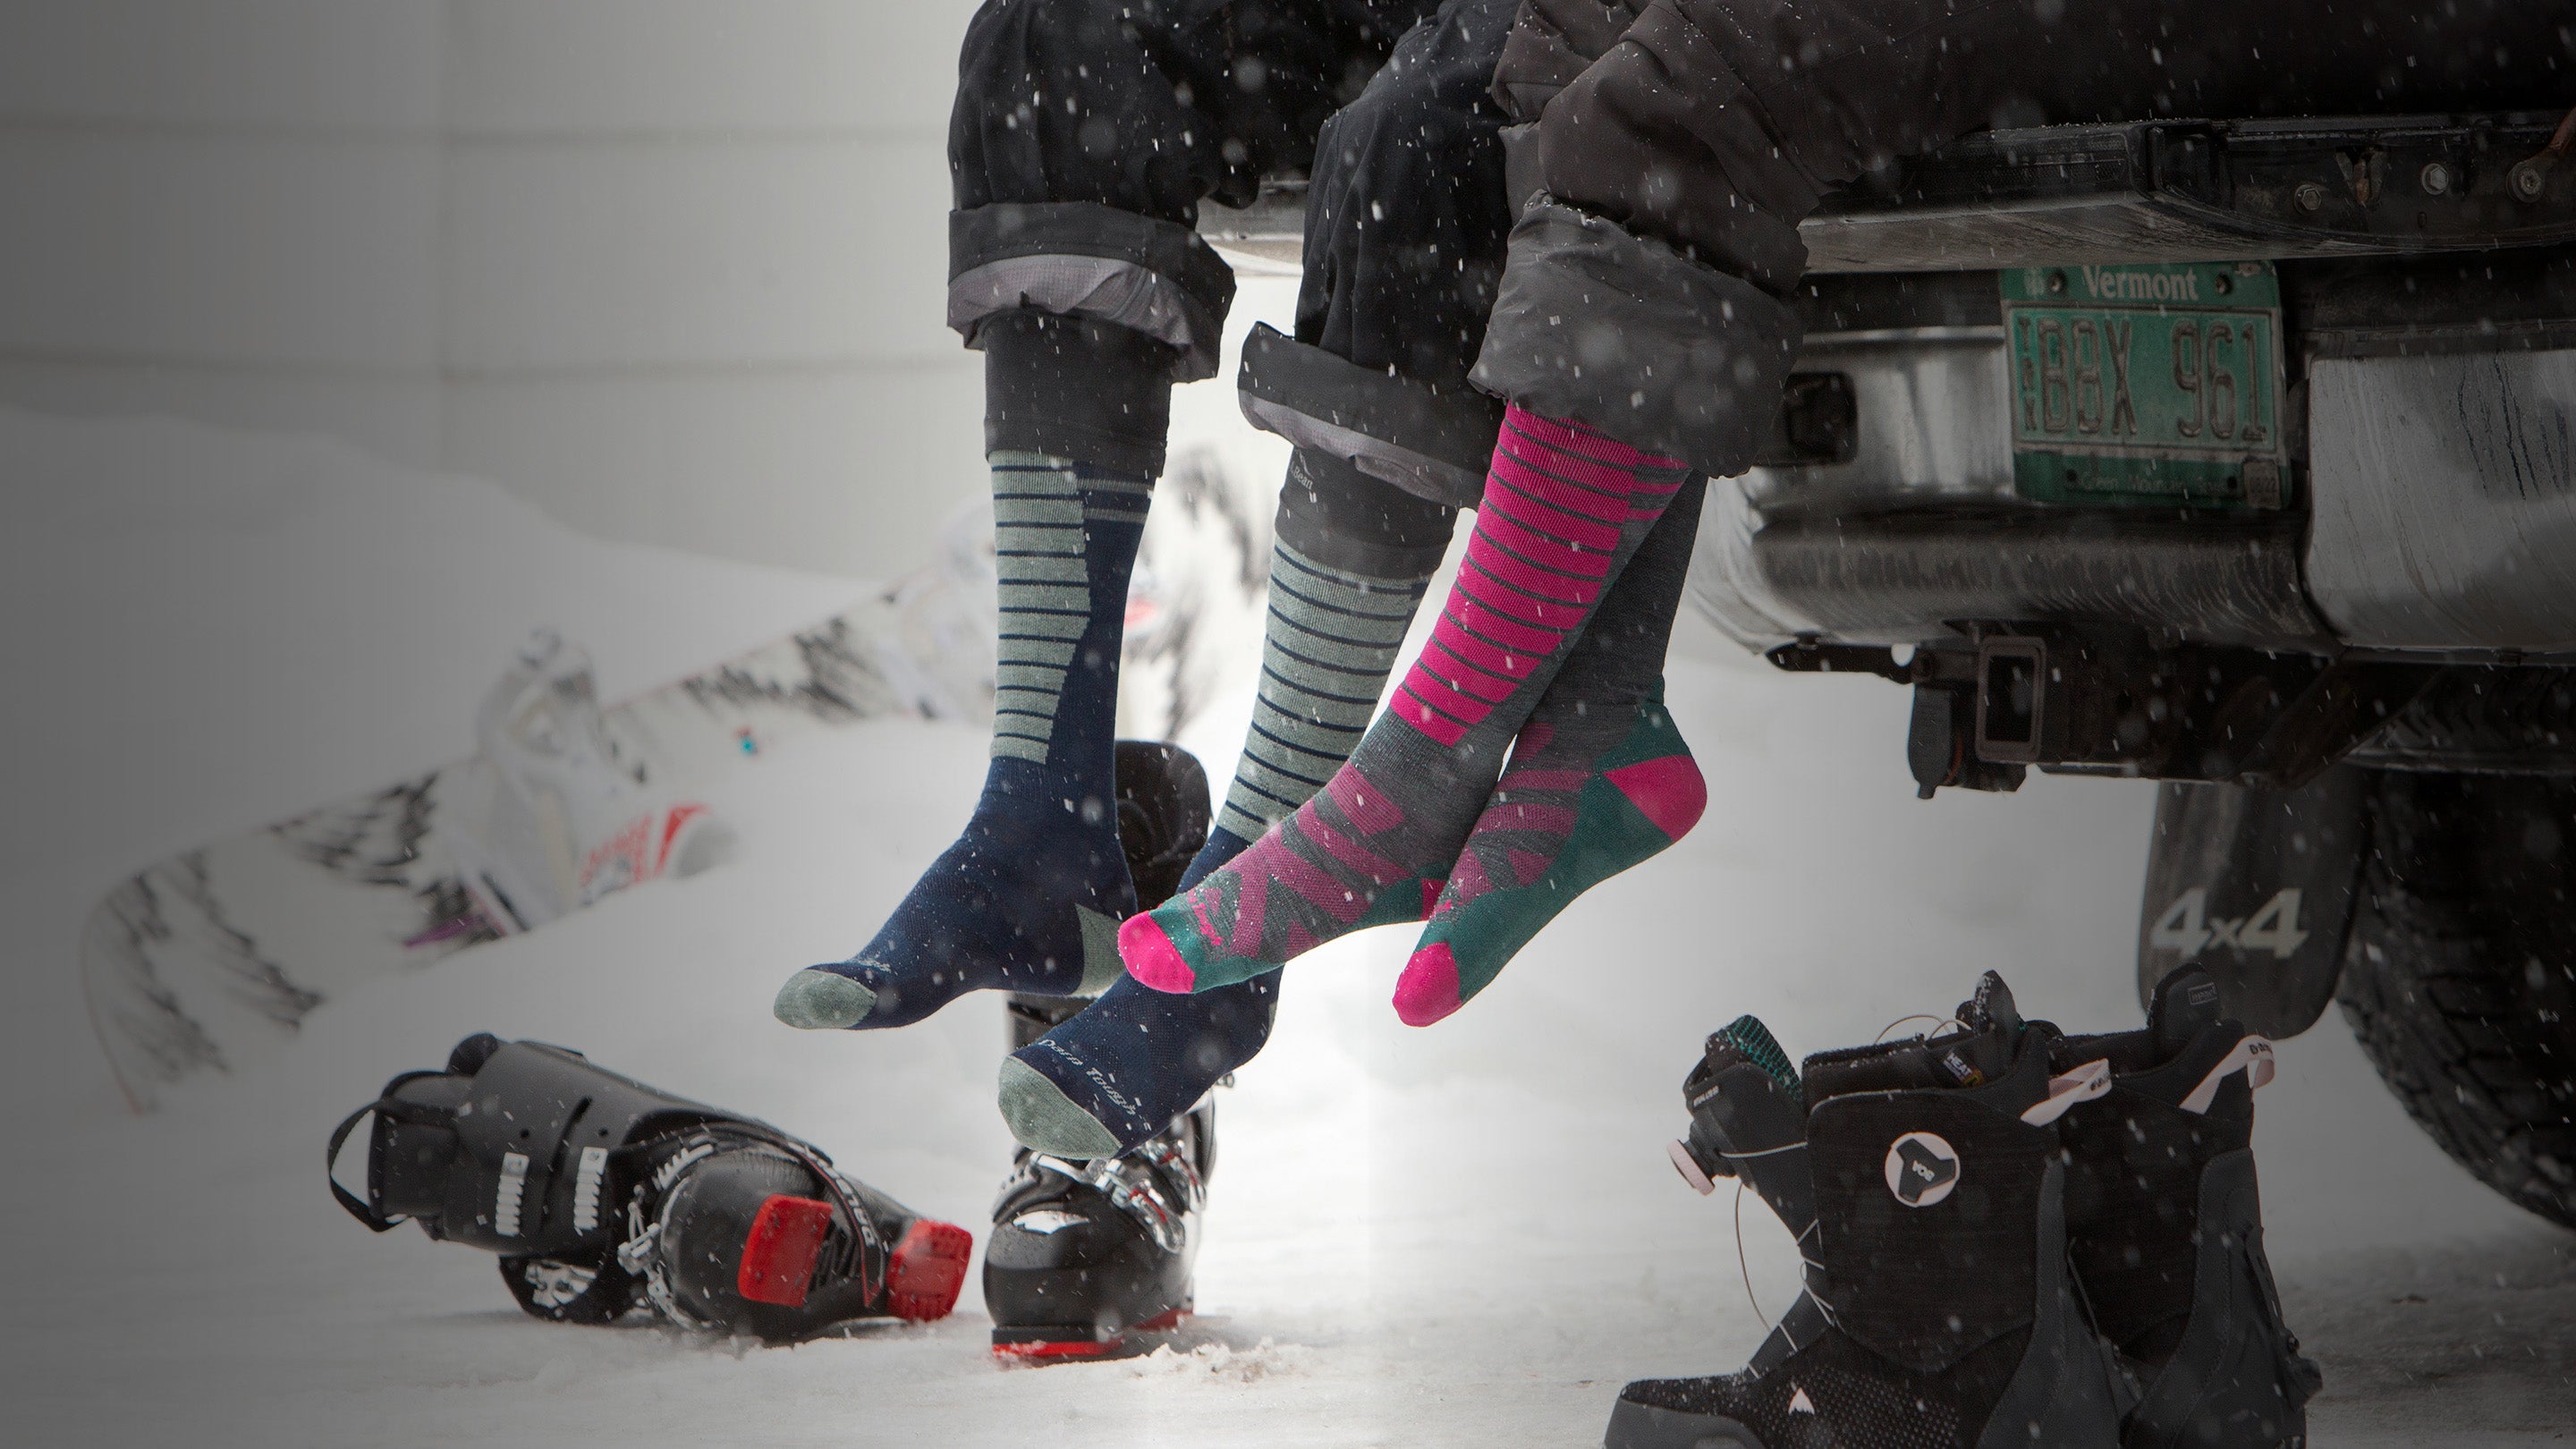 Skier and snowboarder pulling on boots over their merino wool ski socks and snowboard socks